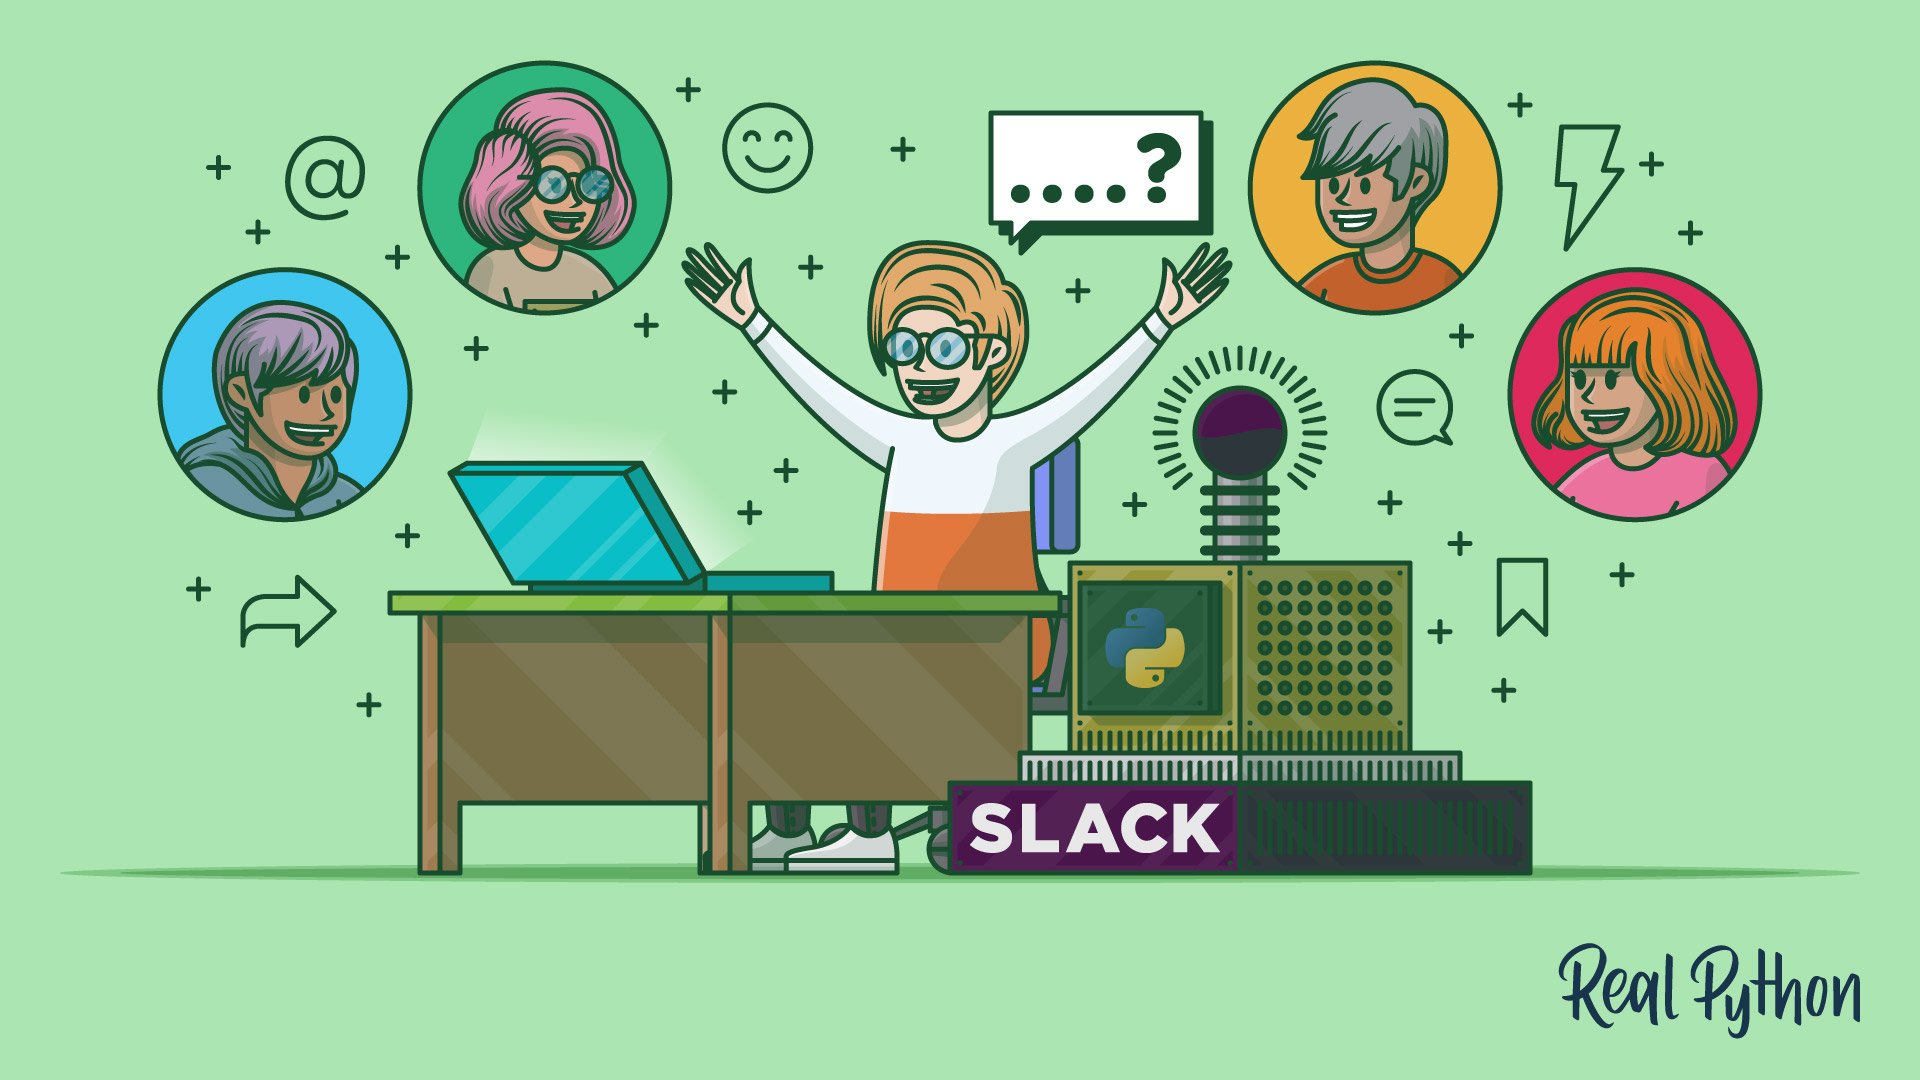 Level Up Your Skills With the Real Python Slack Community